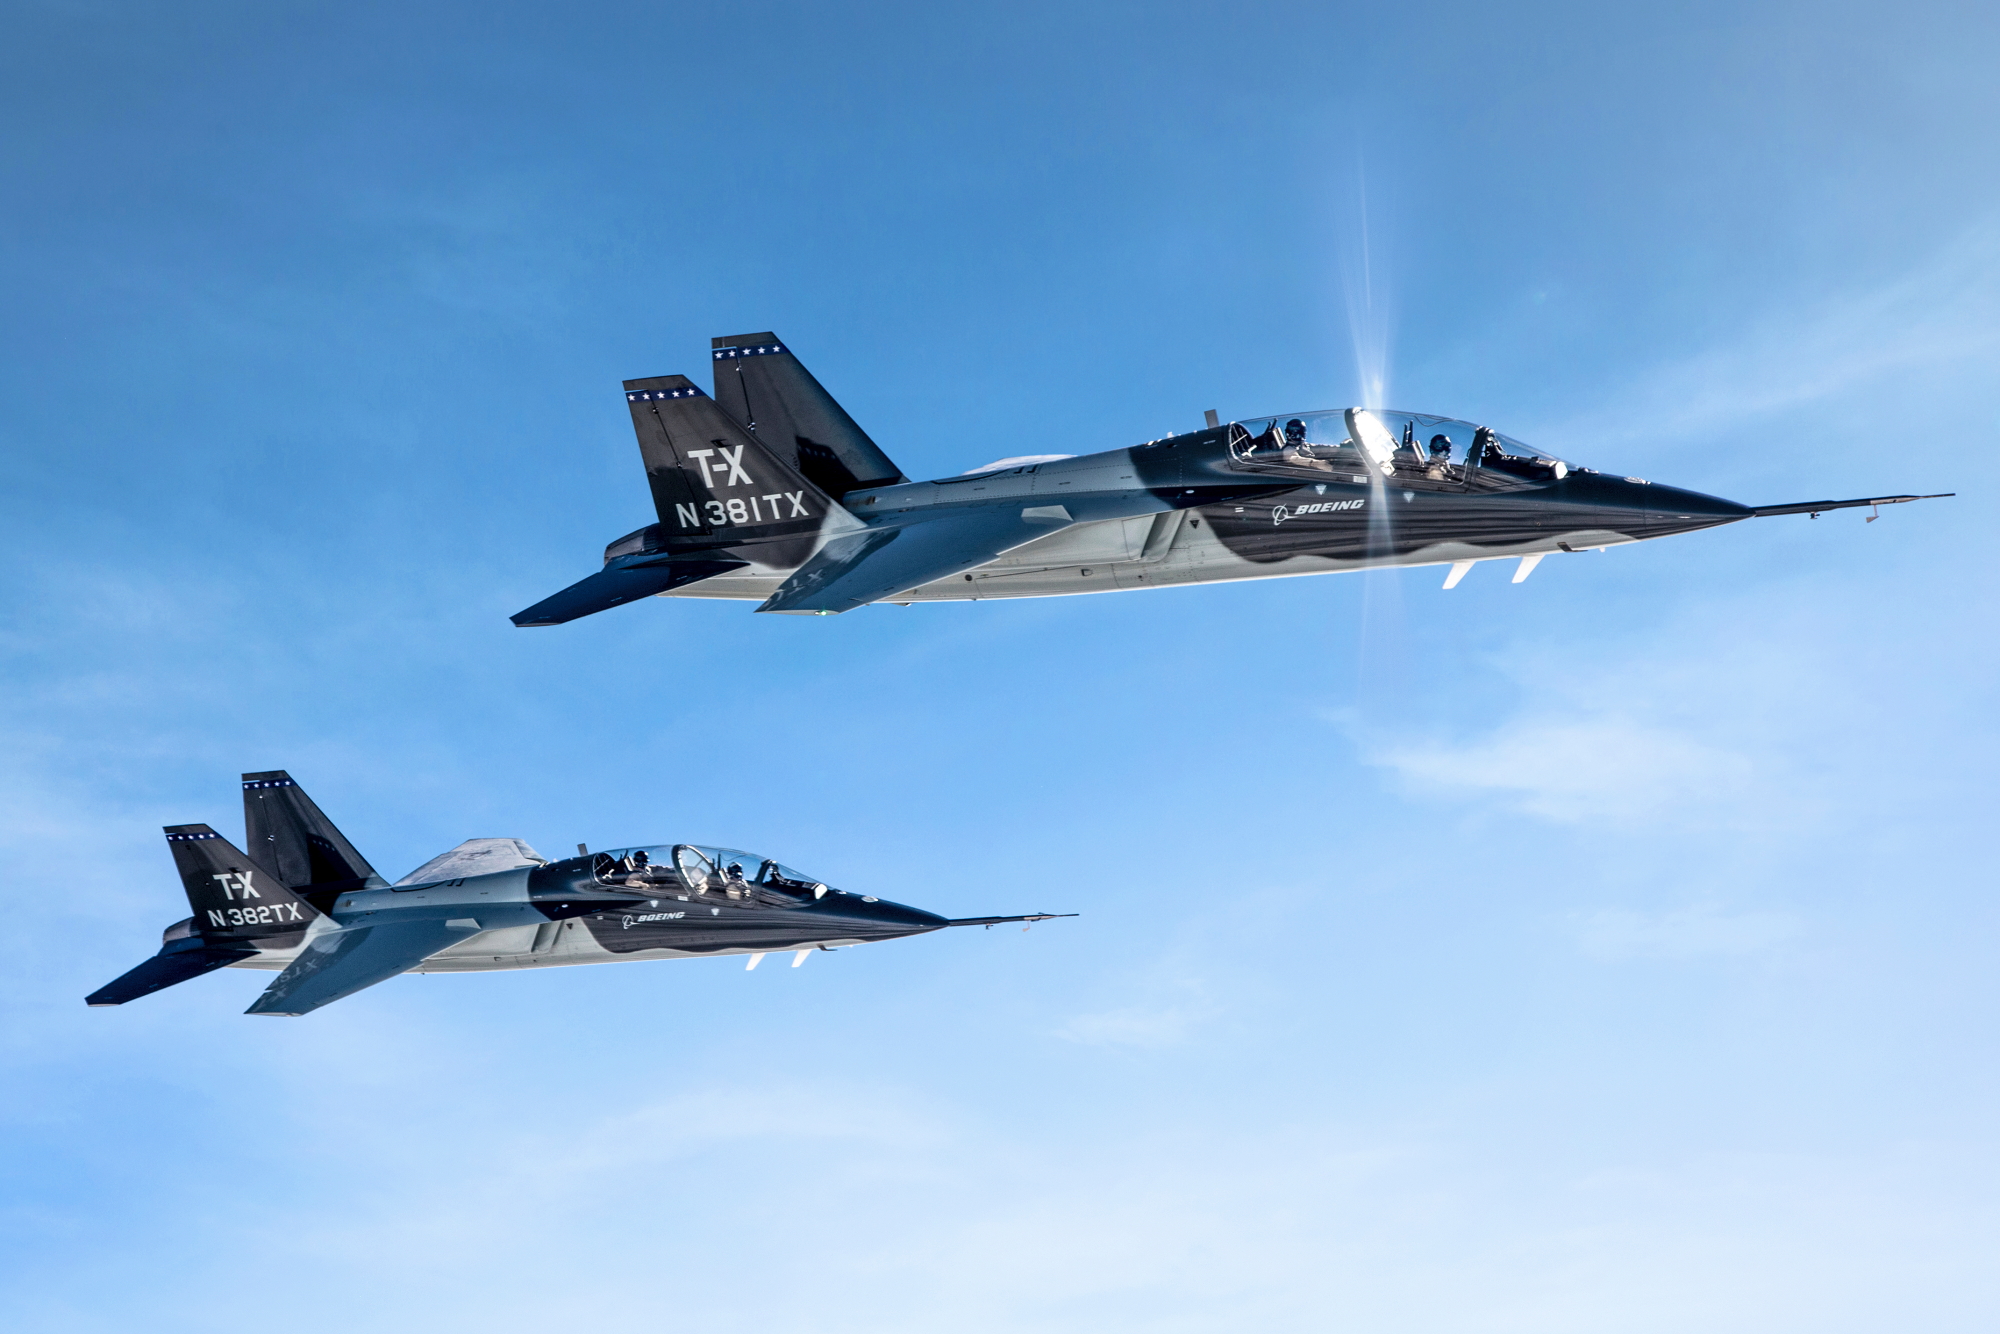 U.S. Air Force pilots will soon train for combat with T-X jets and simulators from Boeing. Click to enlarge.